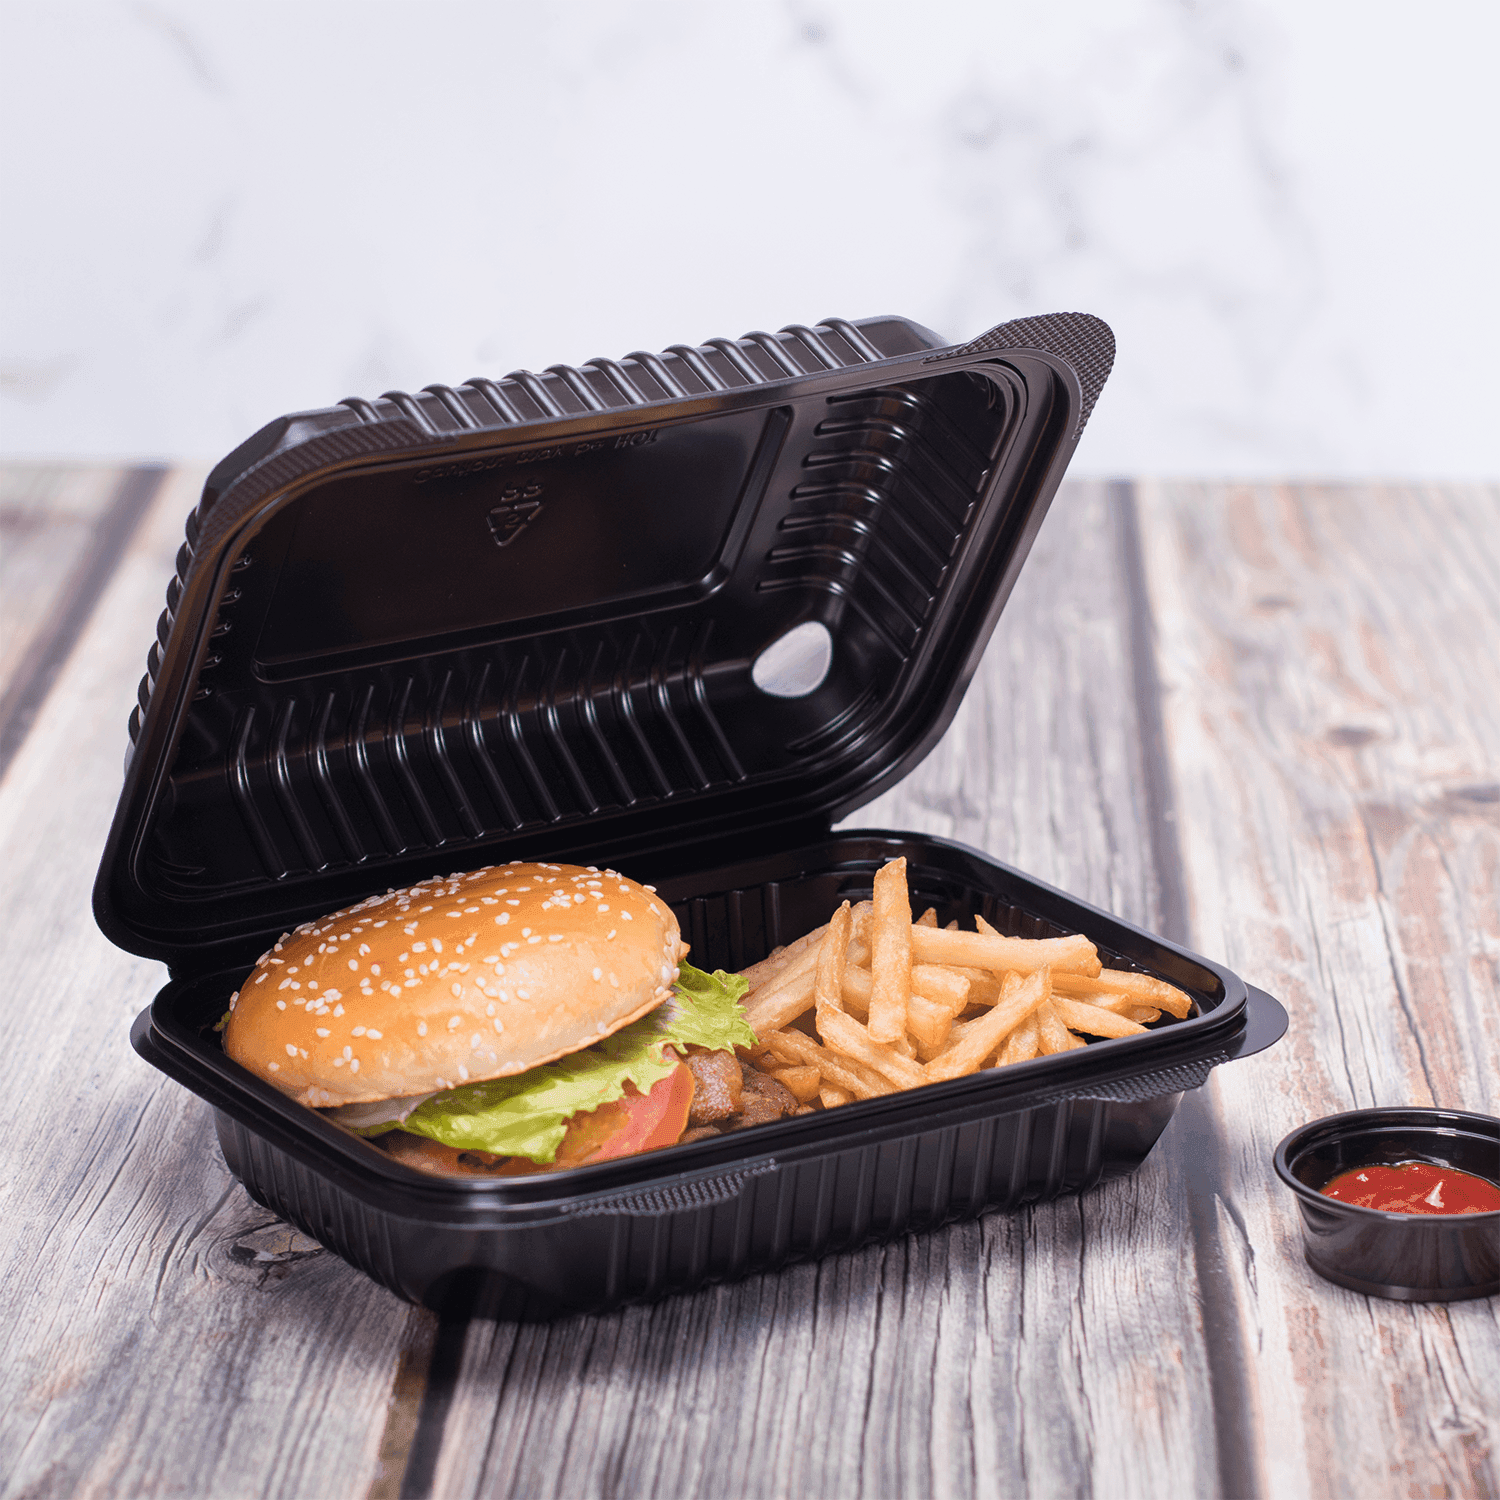 Black Karat 9'' x 6" PP Plastic Hinged Container with a burger and fries inside